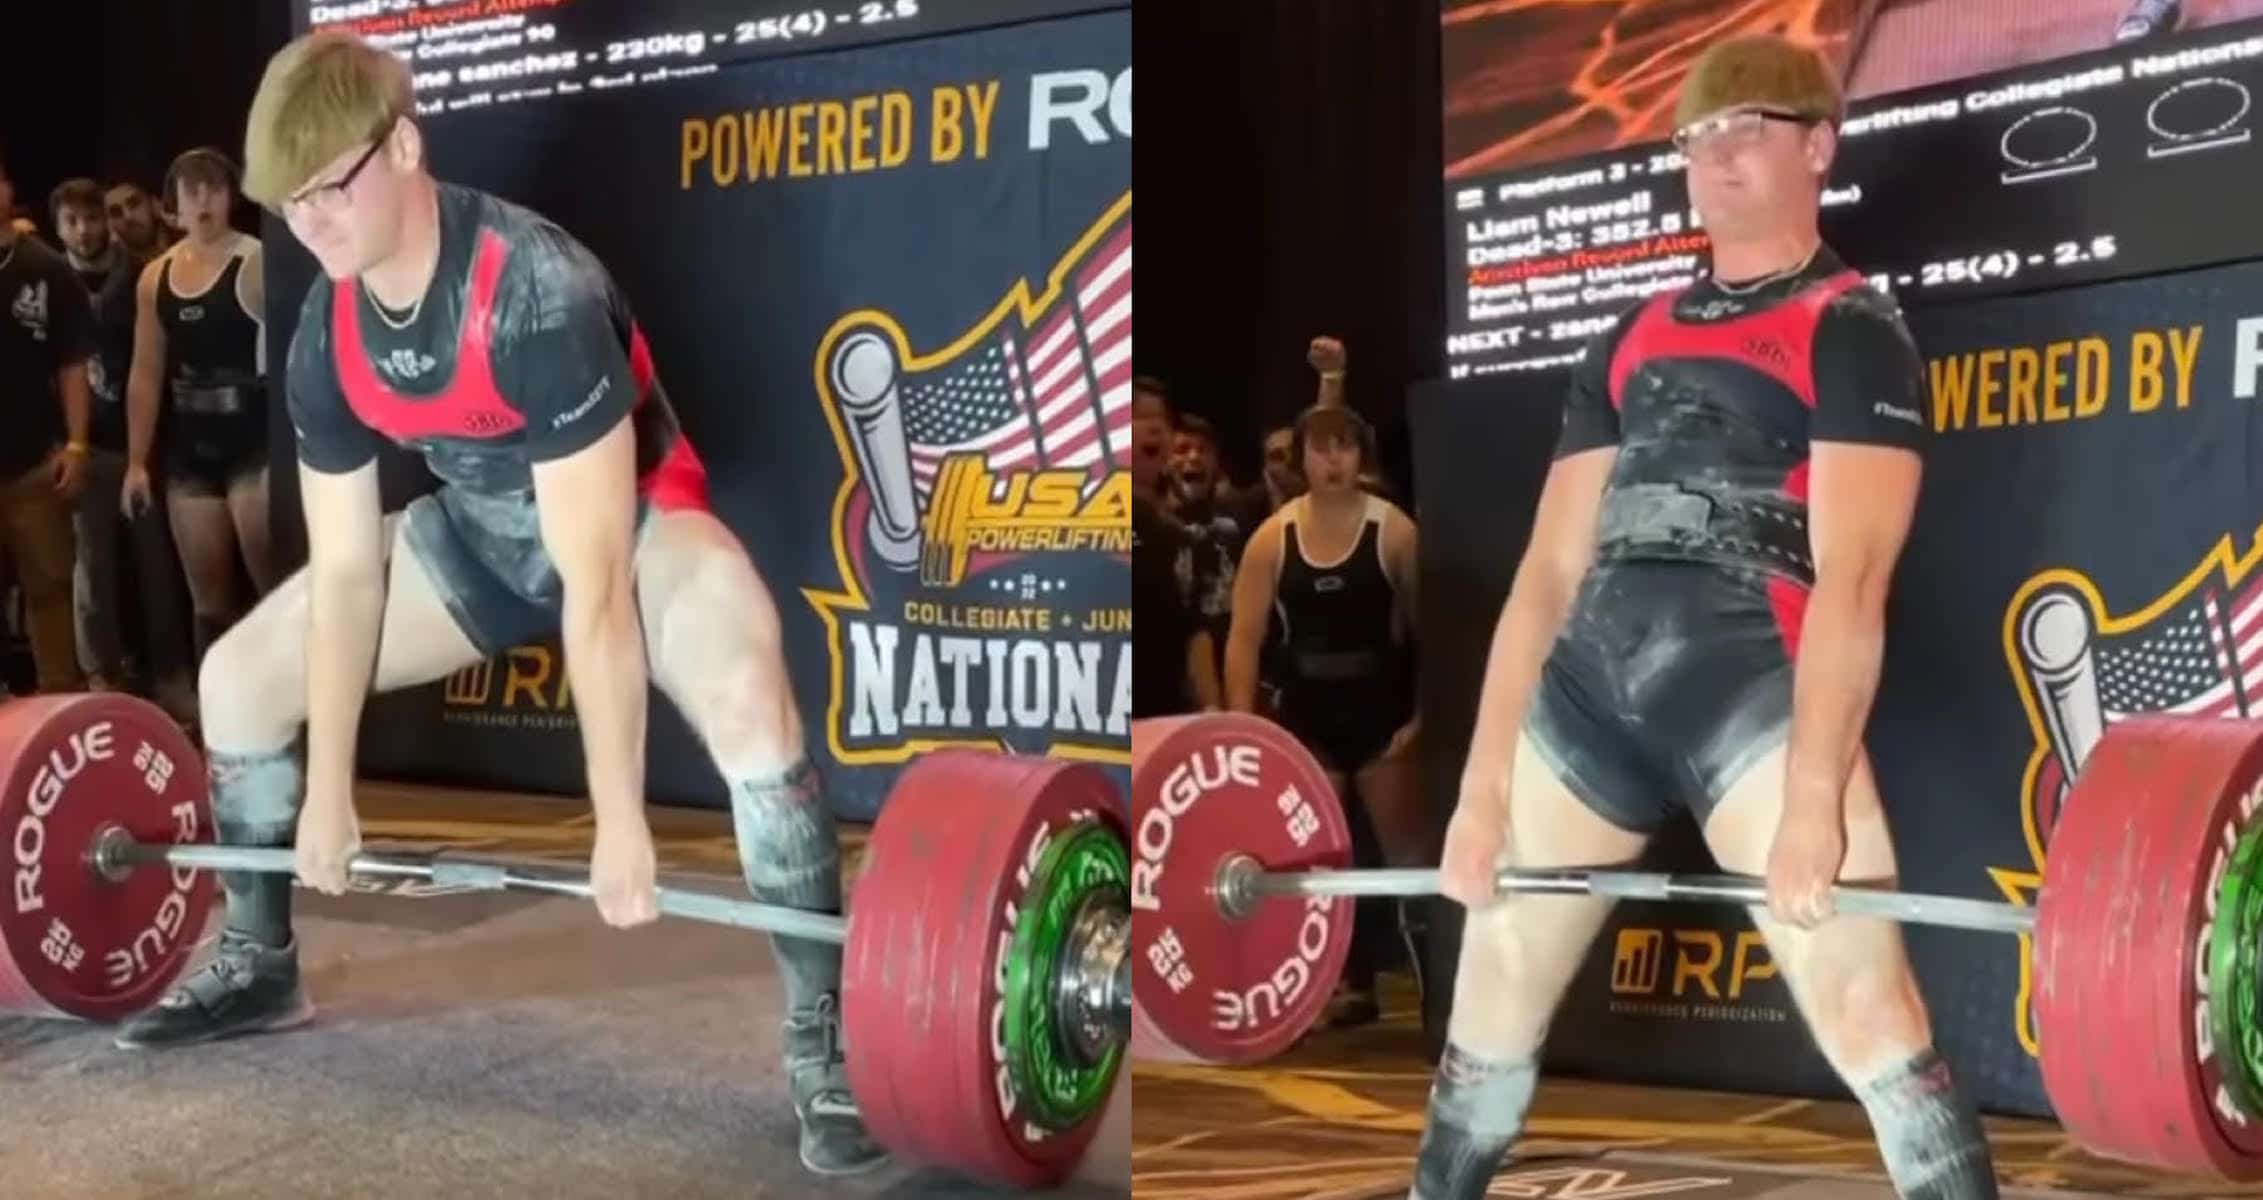 Teen sets American record with 465 pound deadlift